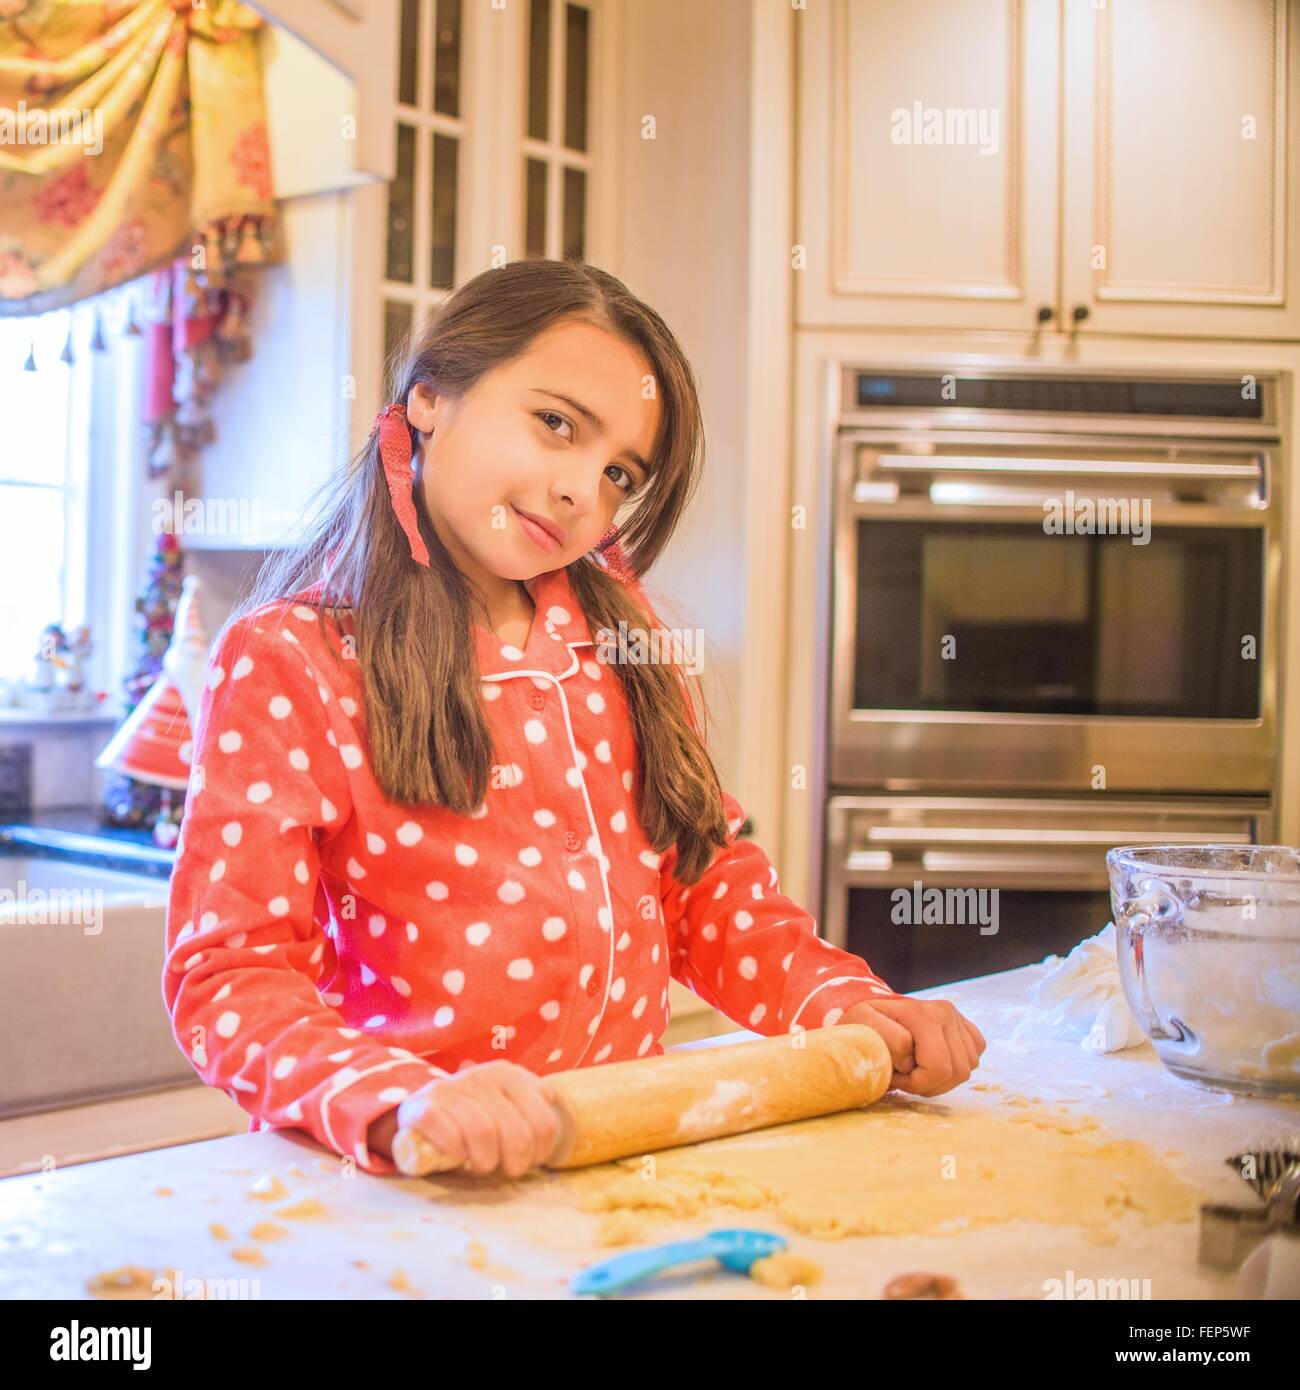 Portrait of young girl in kitchen, using rolling pin Stock Photo